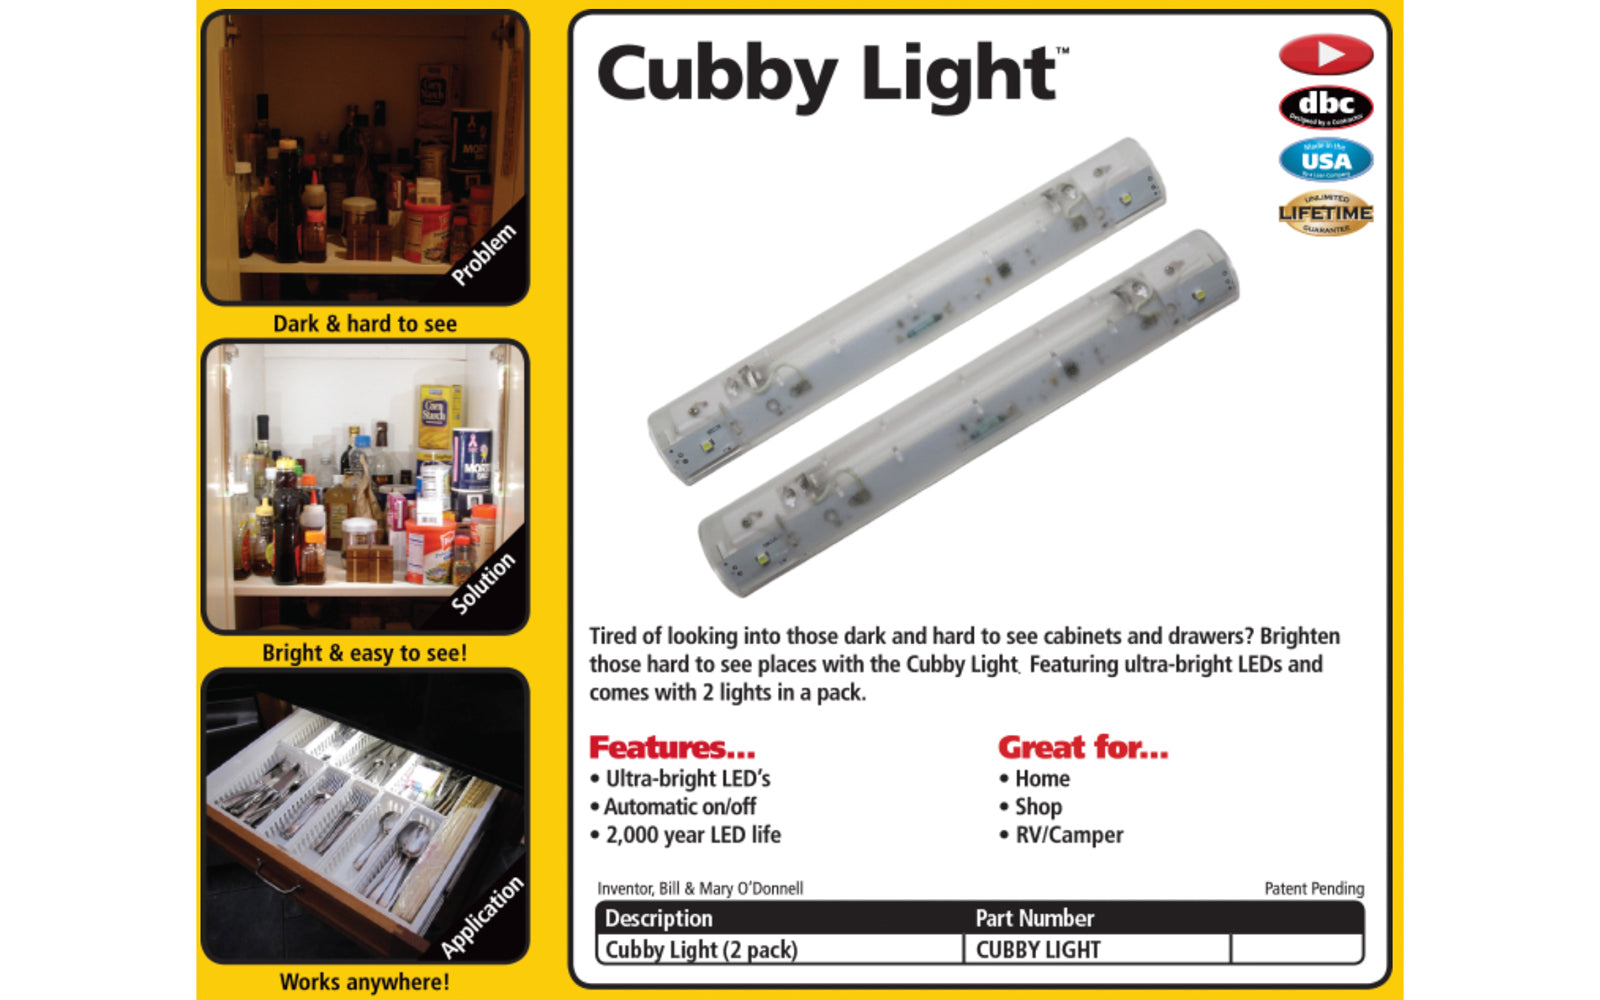 FastCap Cubby Light ~ 2-Pack LED Cabinet Light Set - Brightens cabinets, cupboards, drawers - Takes AAA batteries - Includes 6 batteries - Bright LED's - Compact design - 9" length - Made in USA - Model No. CUBBYLIGHT